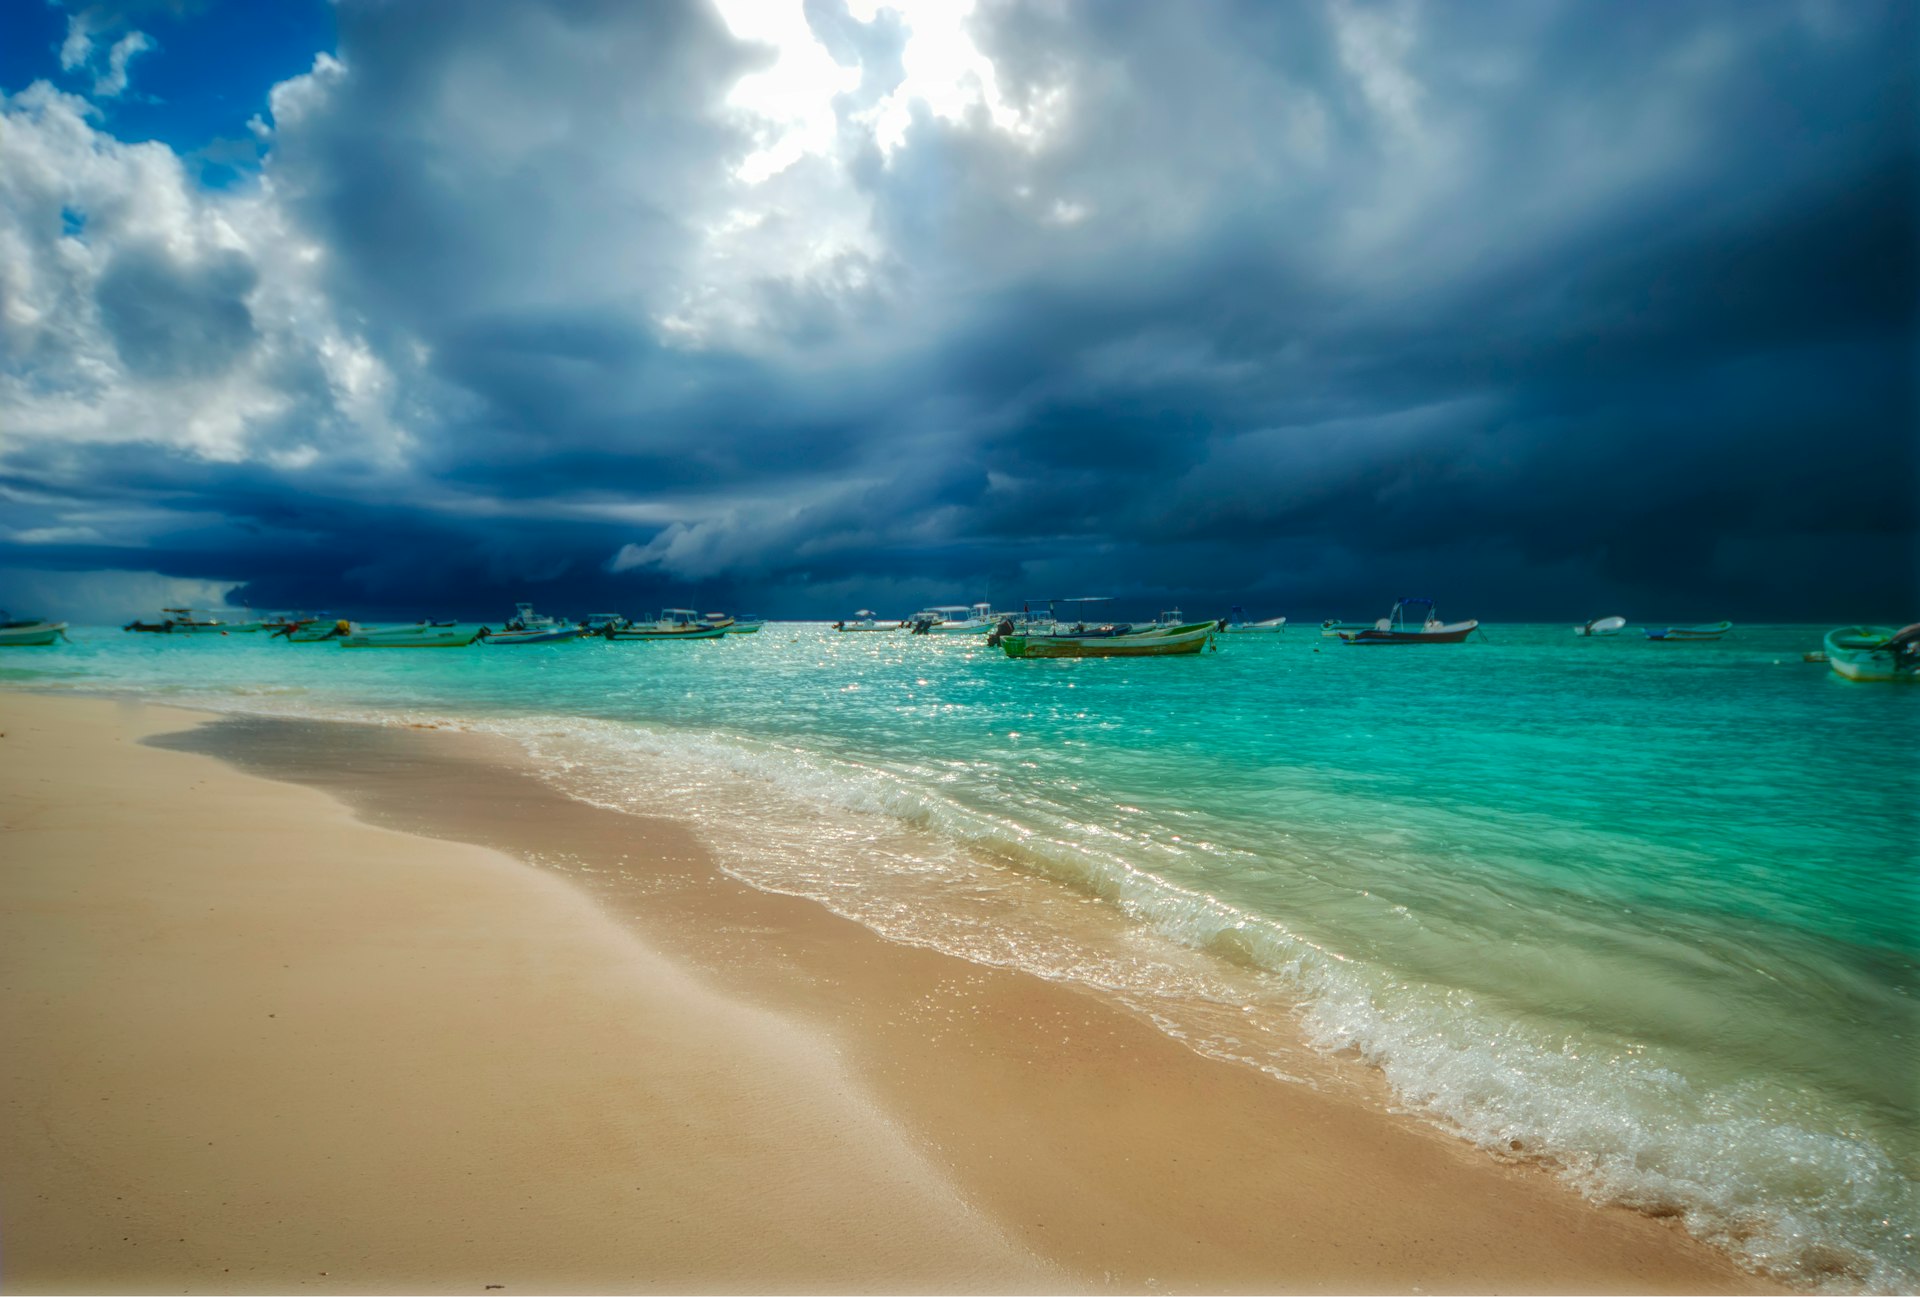 Storm clouds gather out at sea over a beach